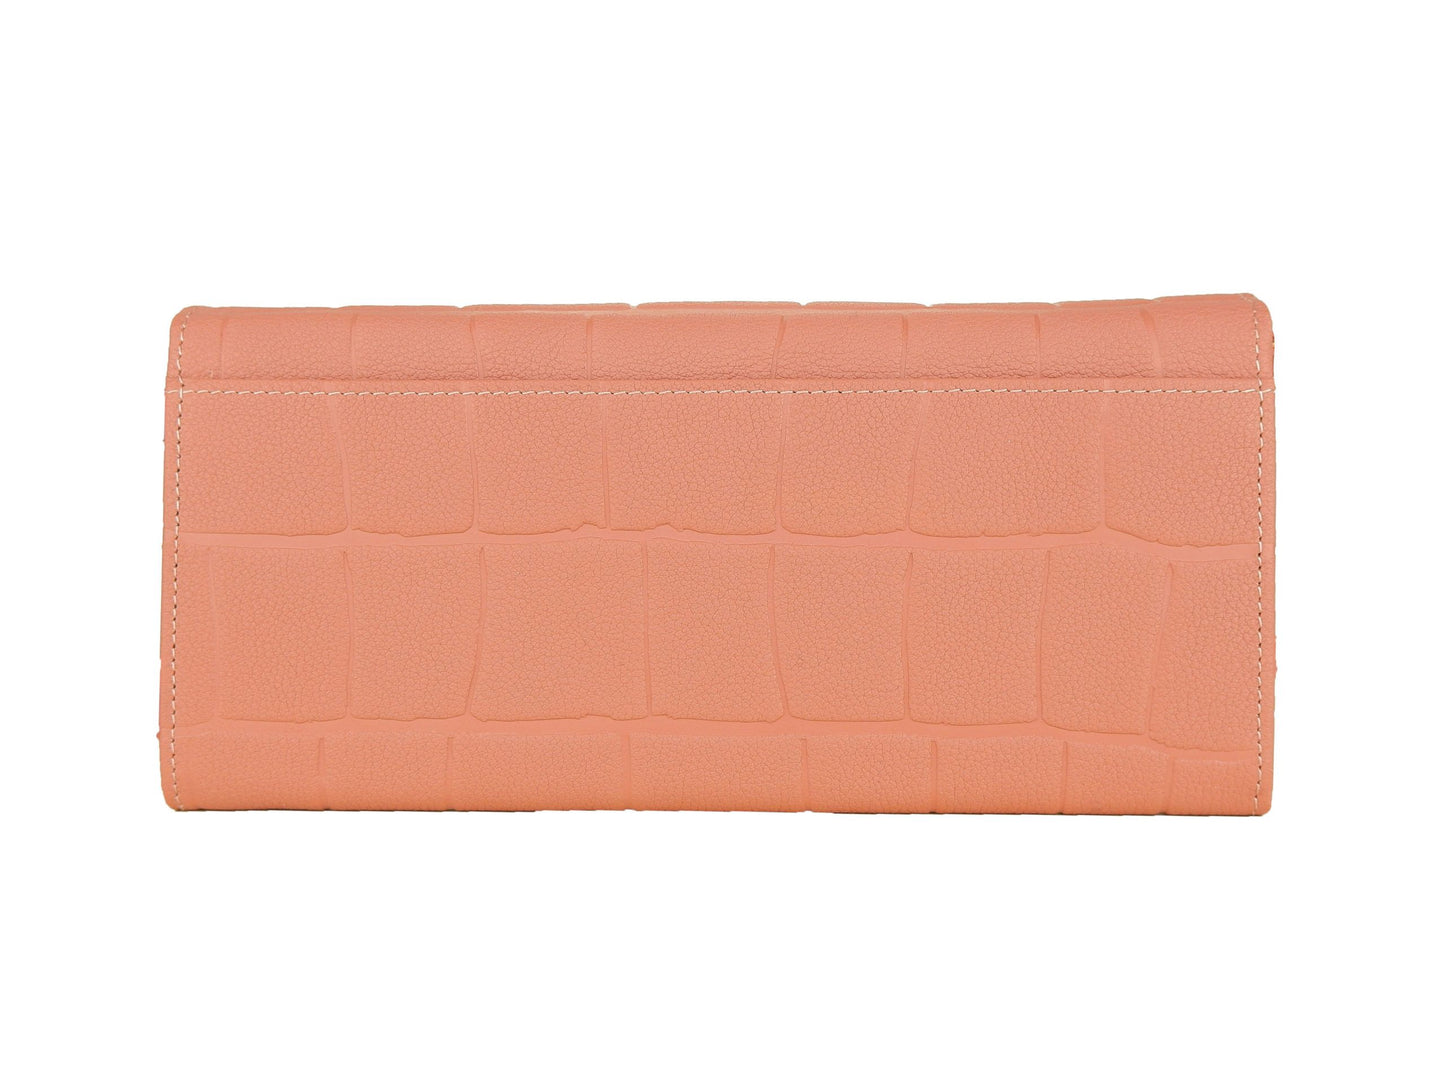 Chic Pink Crossbody Leather Bag